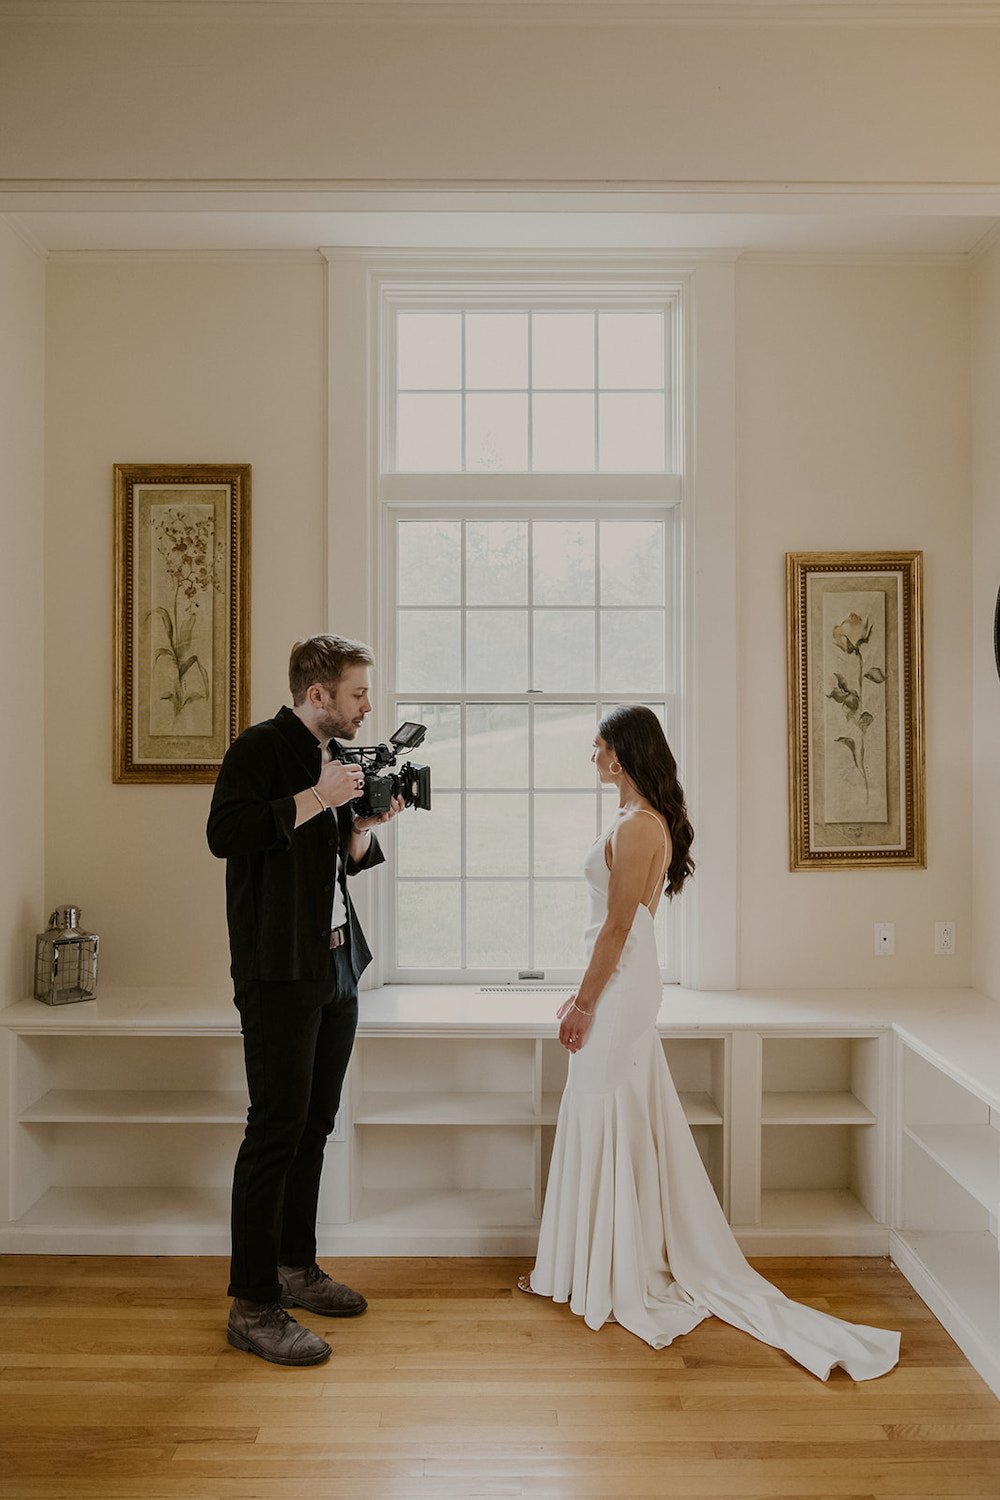 Jonah Paulhamus records the bride after she is fully dressed in her wedding attire. 